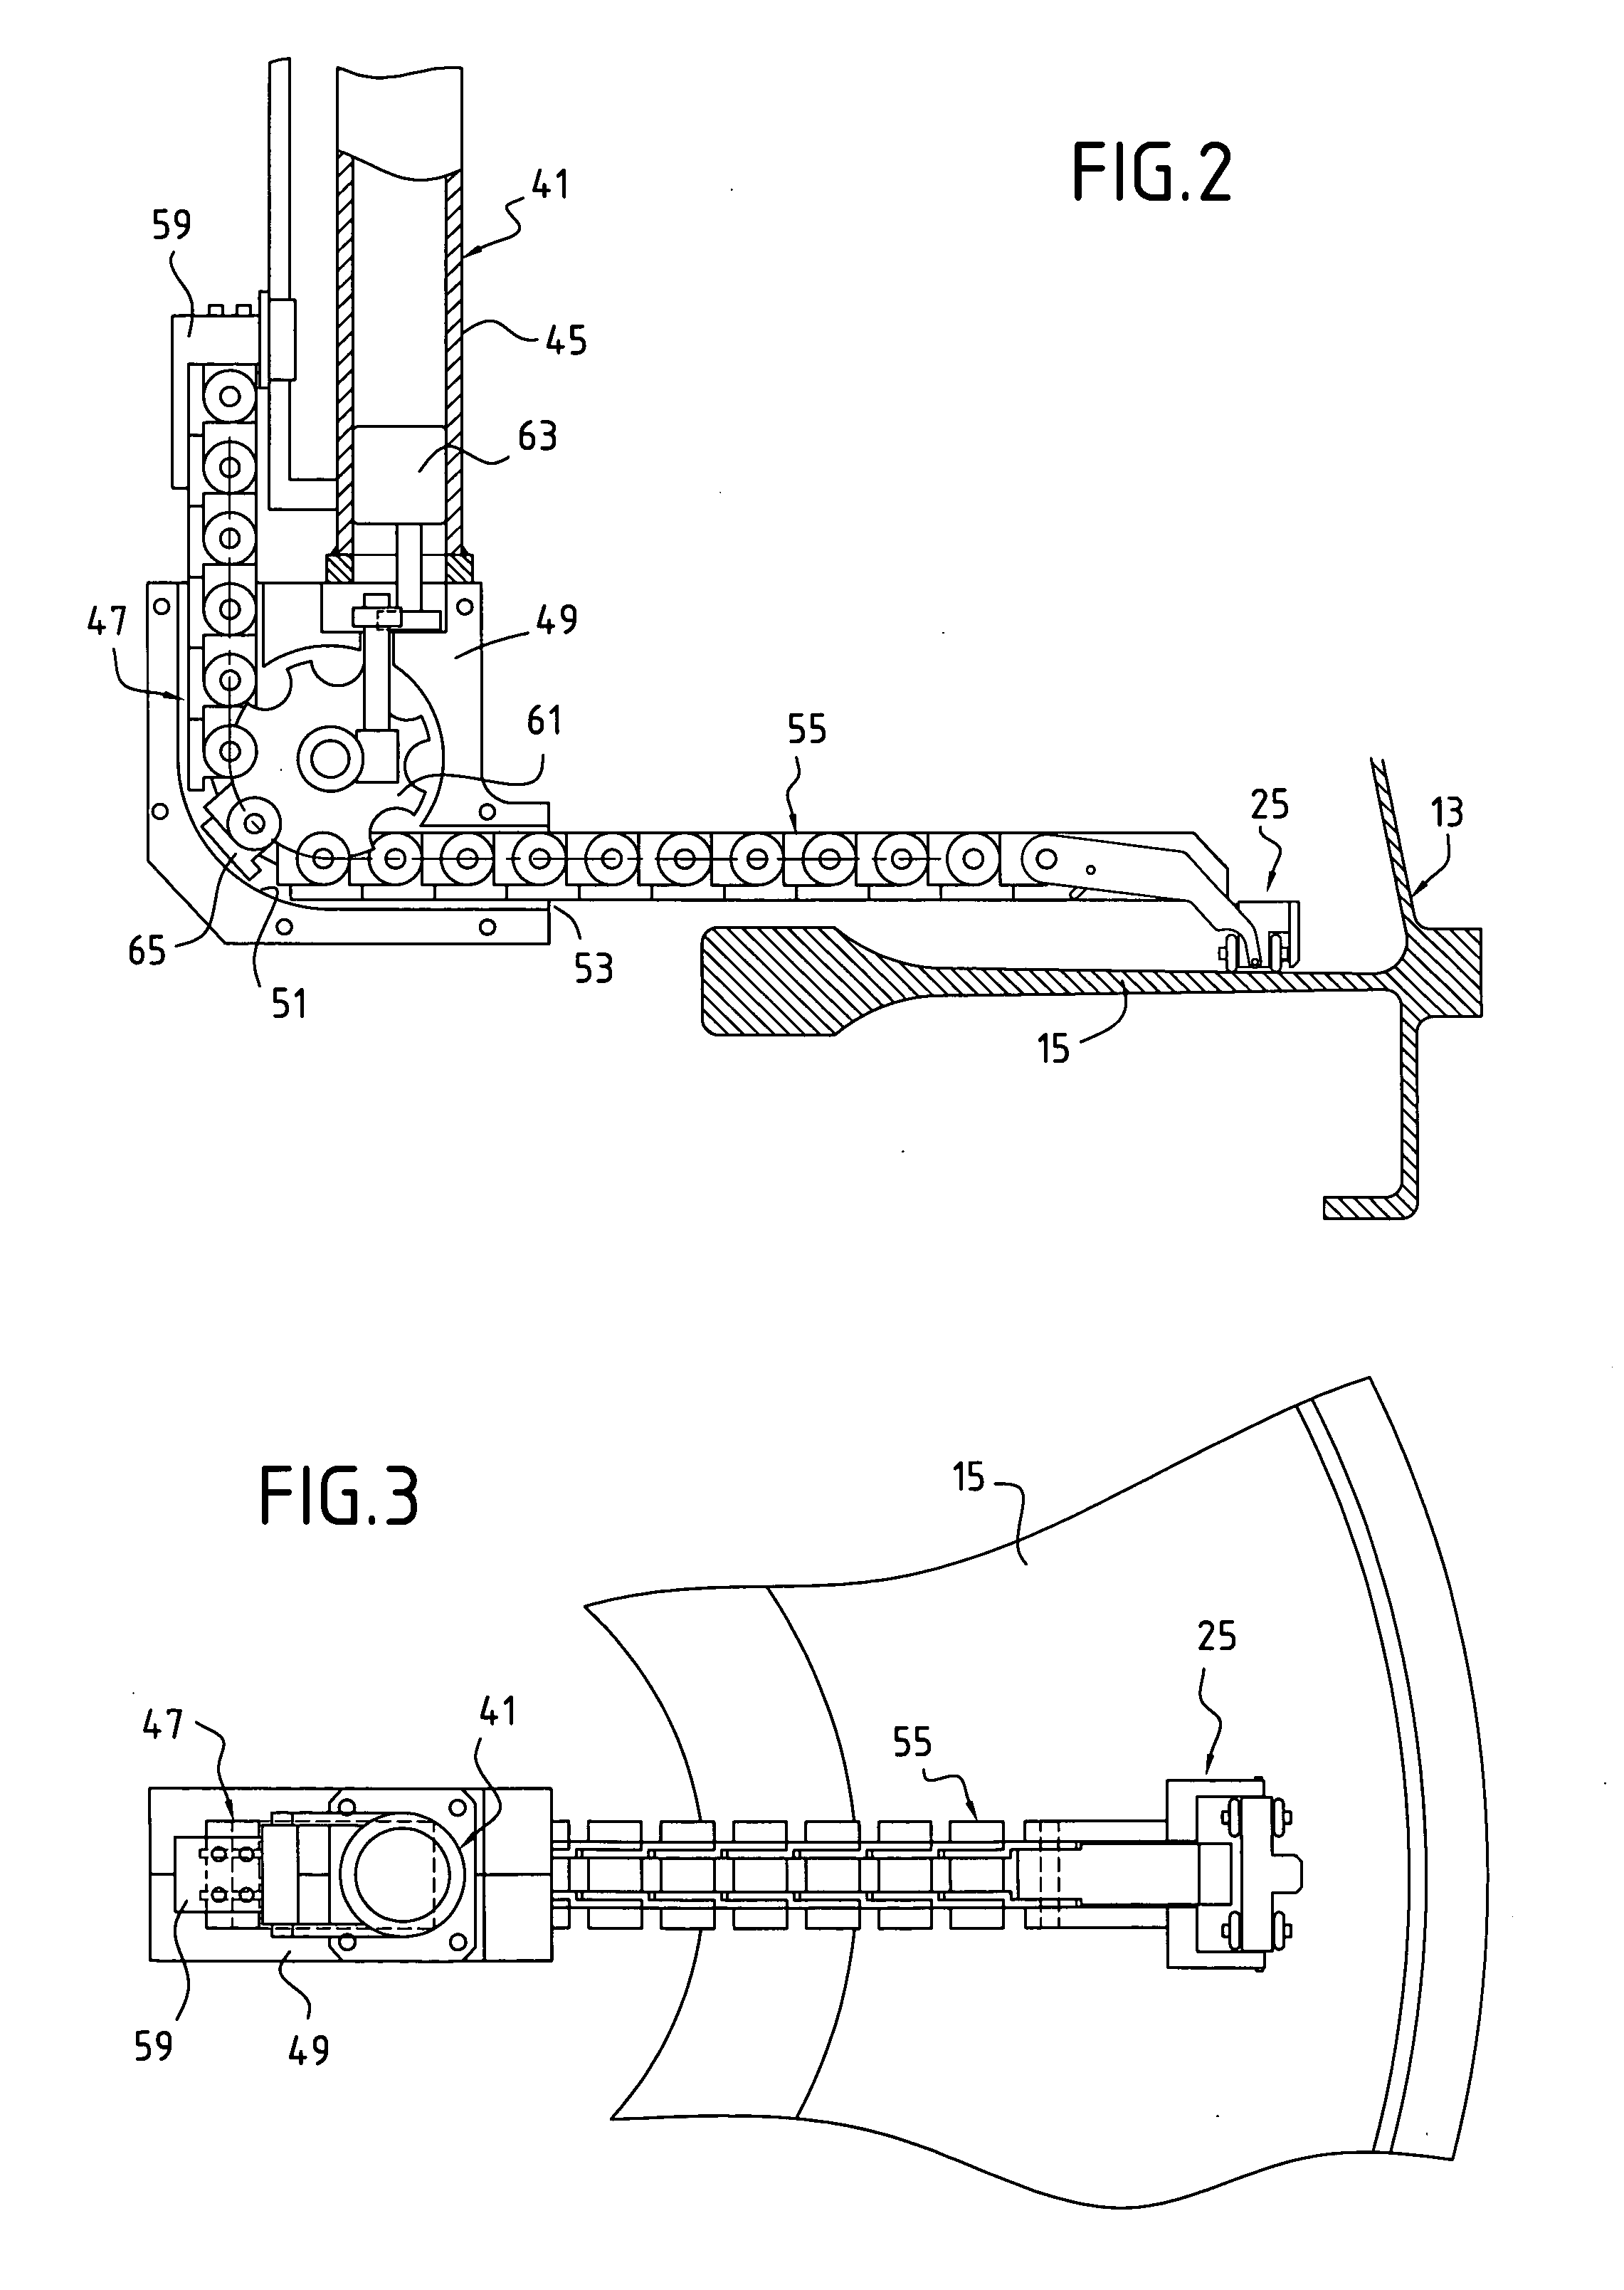 Installation for non-destructive inspection of a part